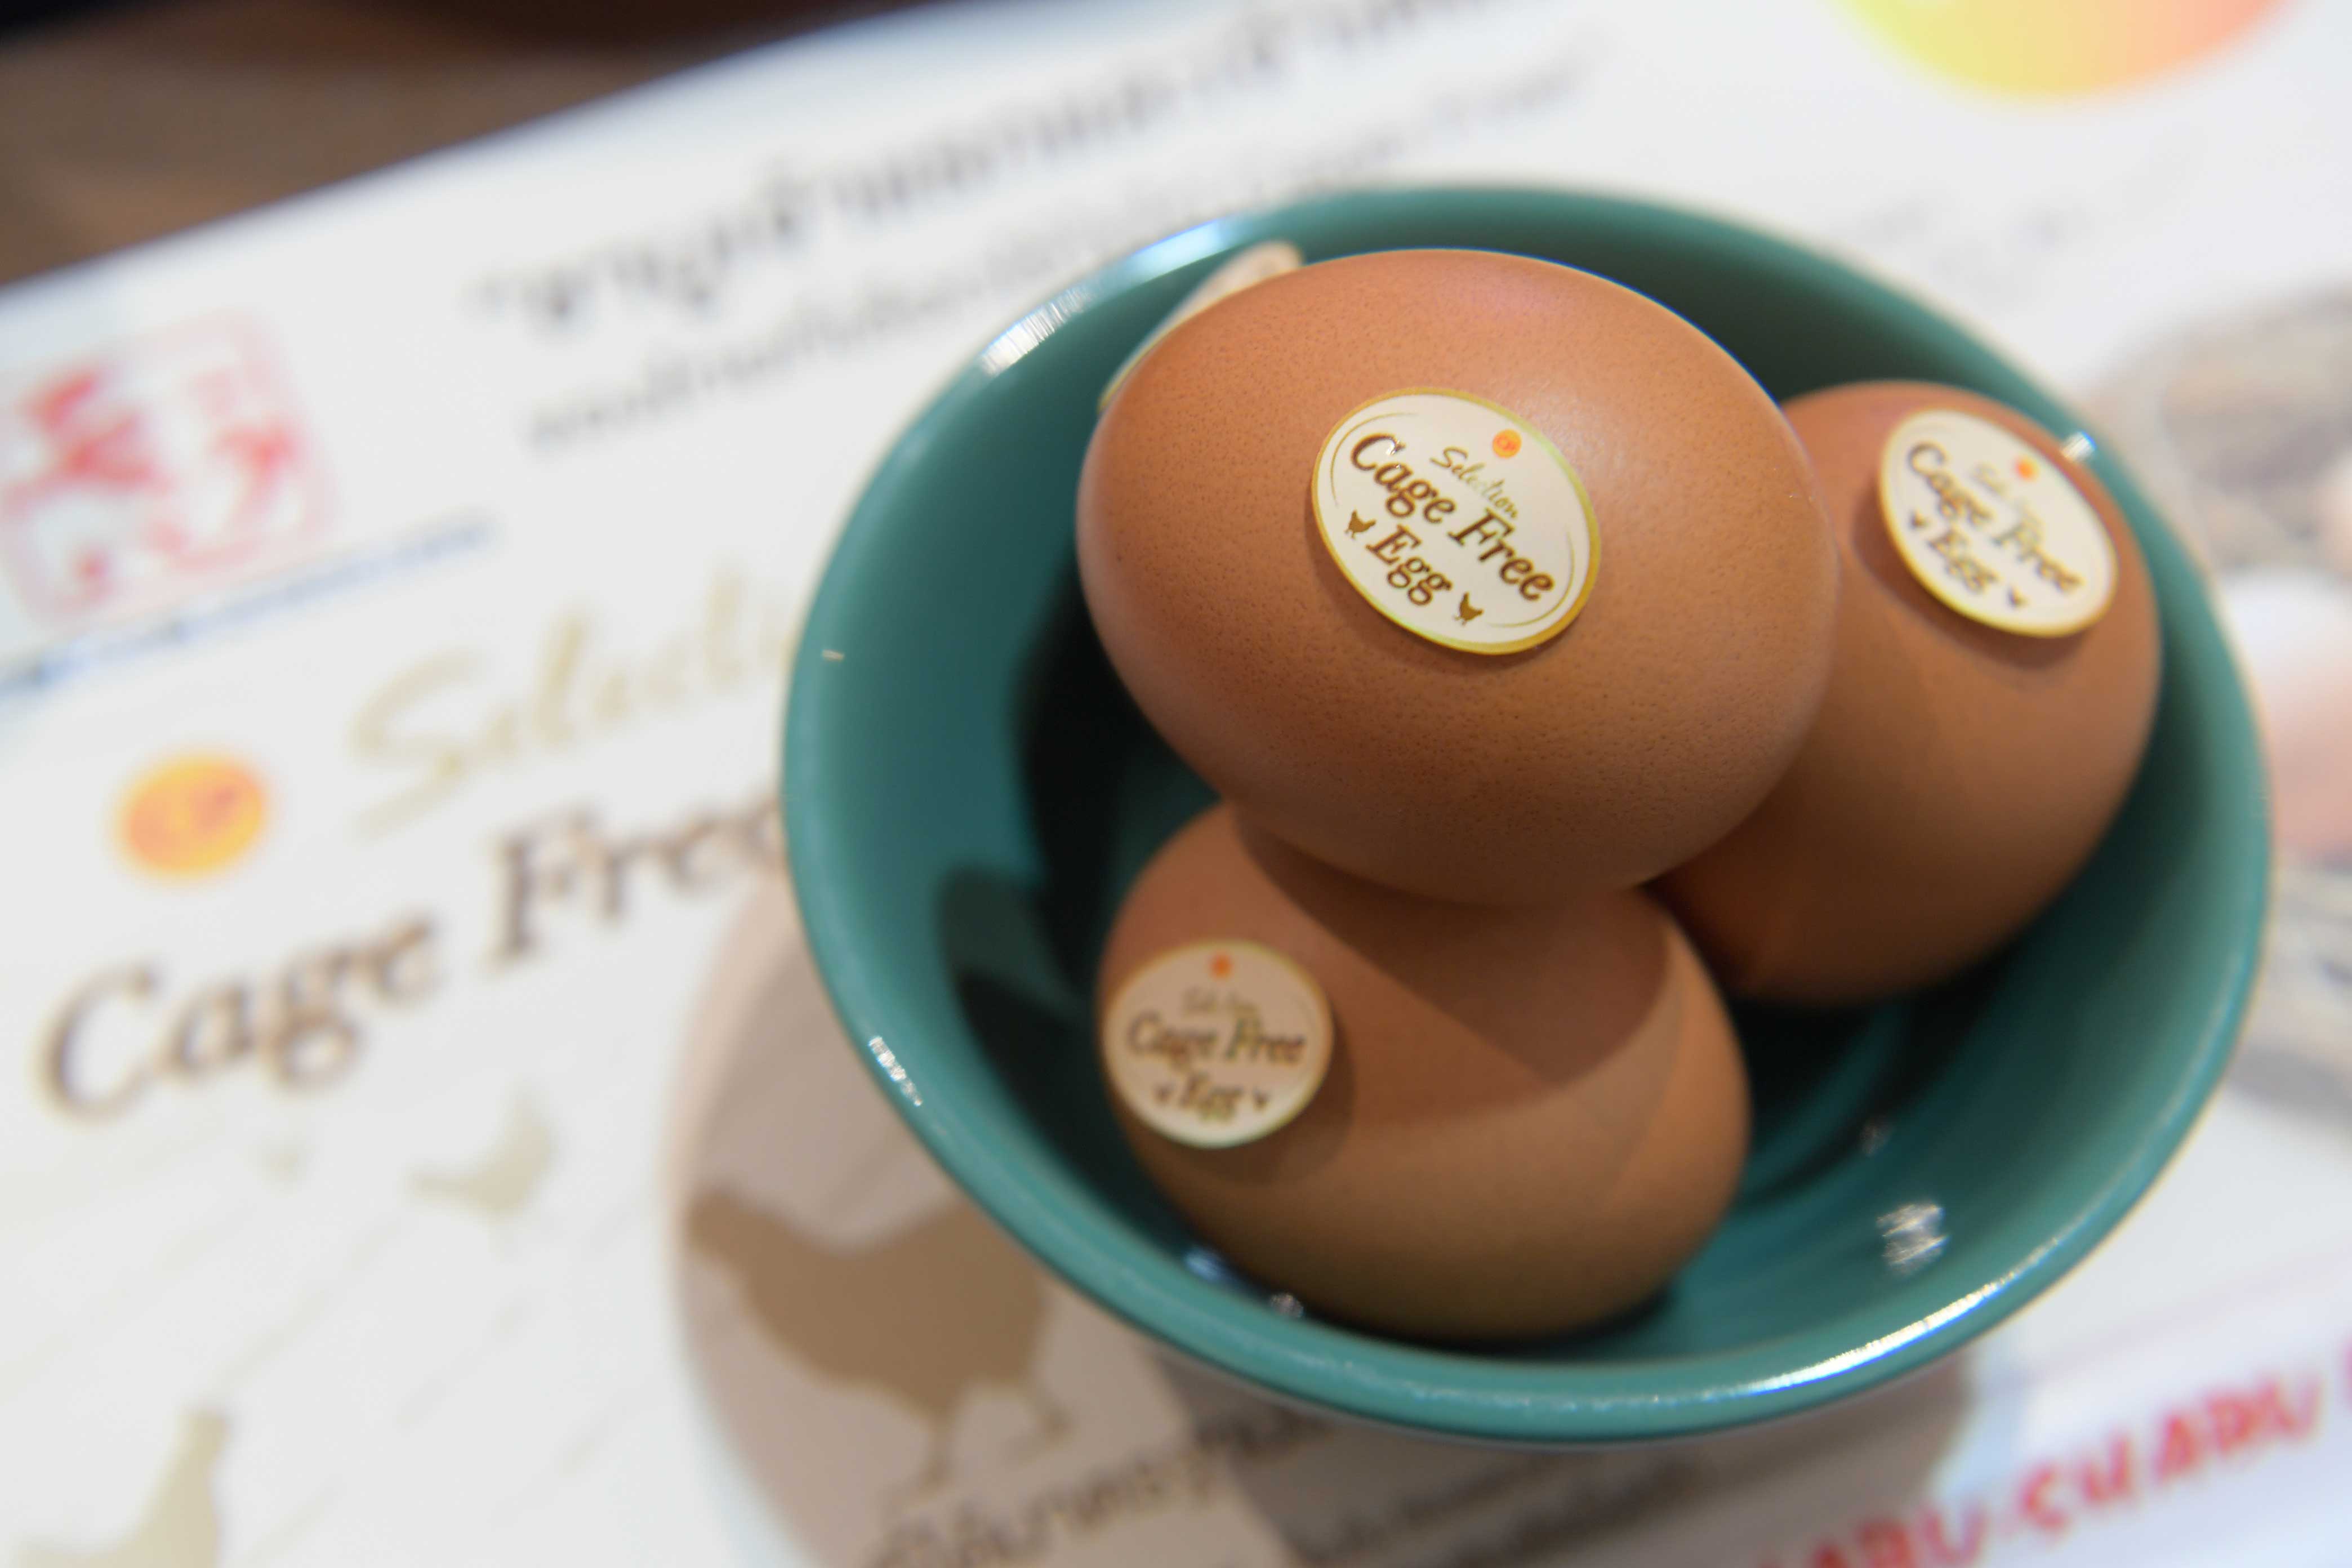 “Mo-Mo-Paradise" now serves CP Selection Cage Free Egg